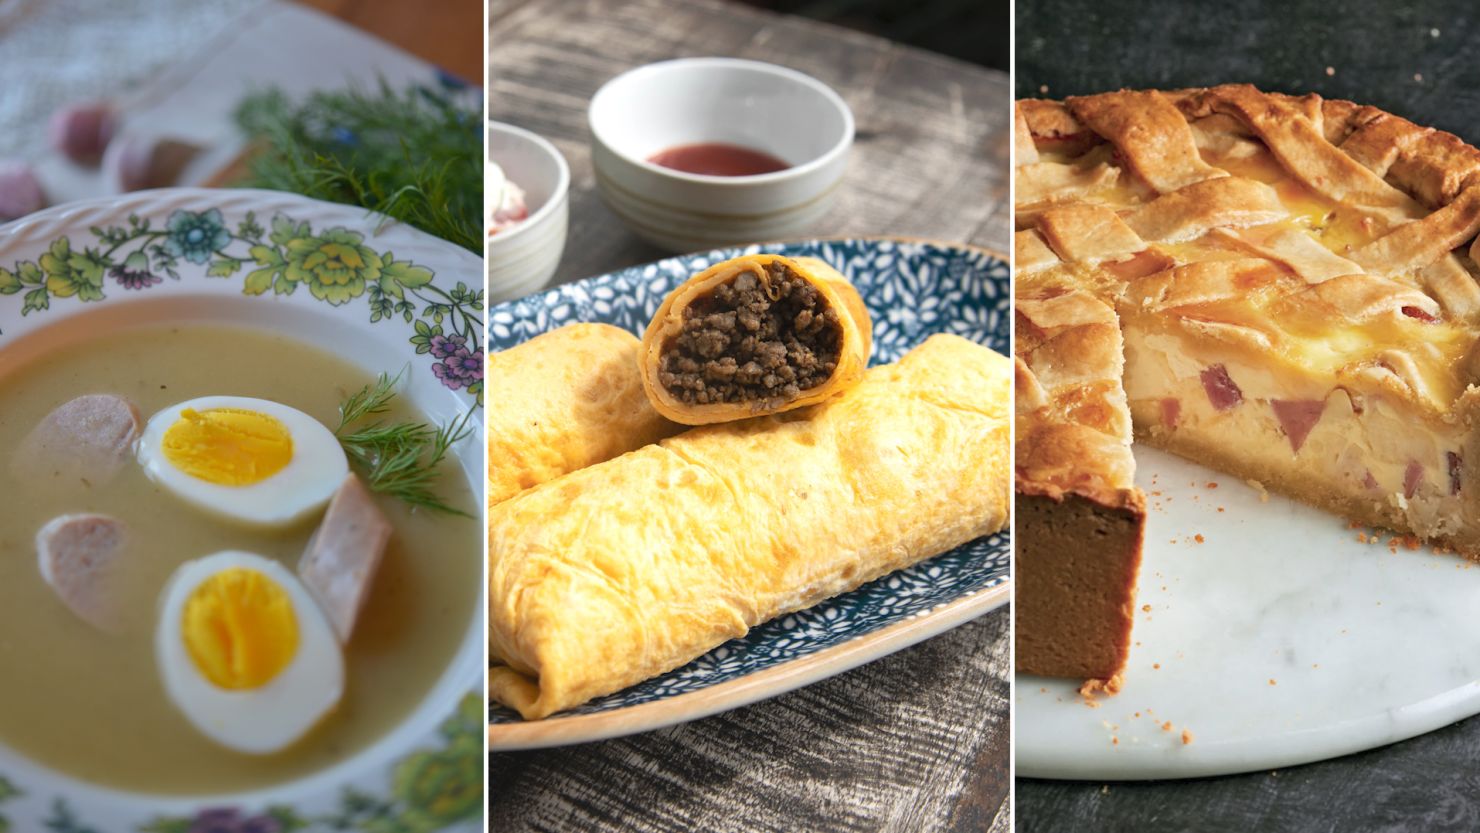 Celebrate Easter with these festive dishes (from left): Polish żurek, or sour rye soup; Singaporean beef murtabak; and Italian pizza rustica.